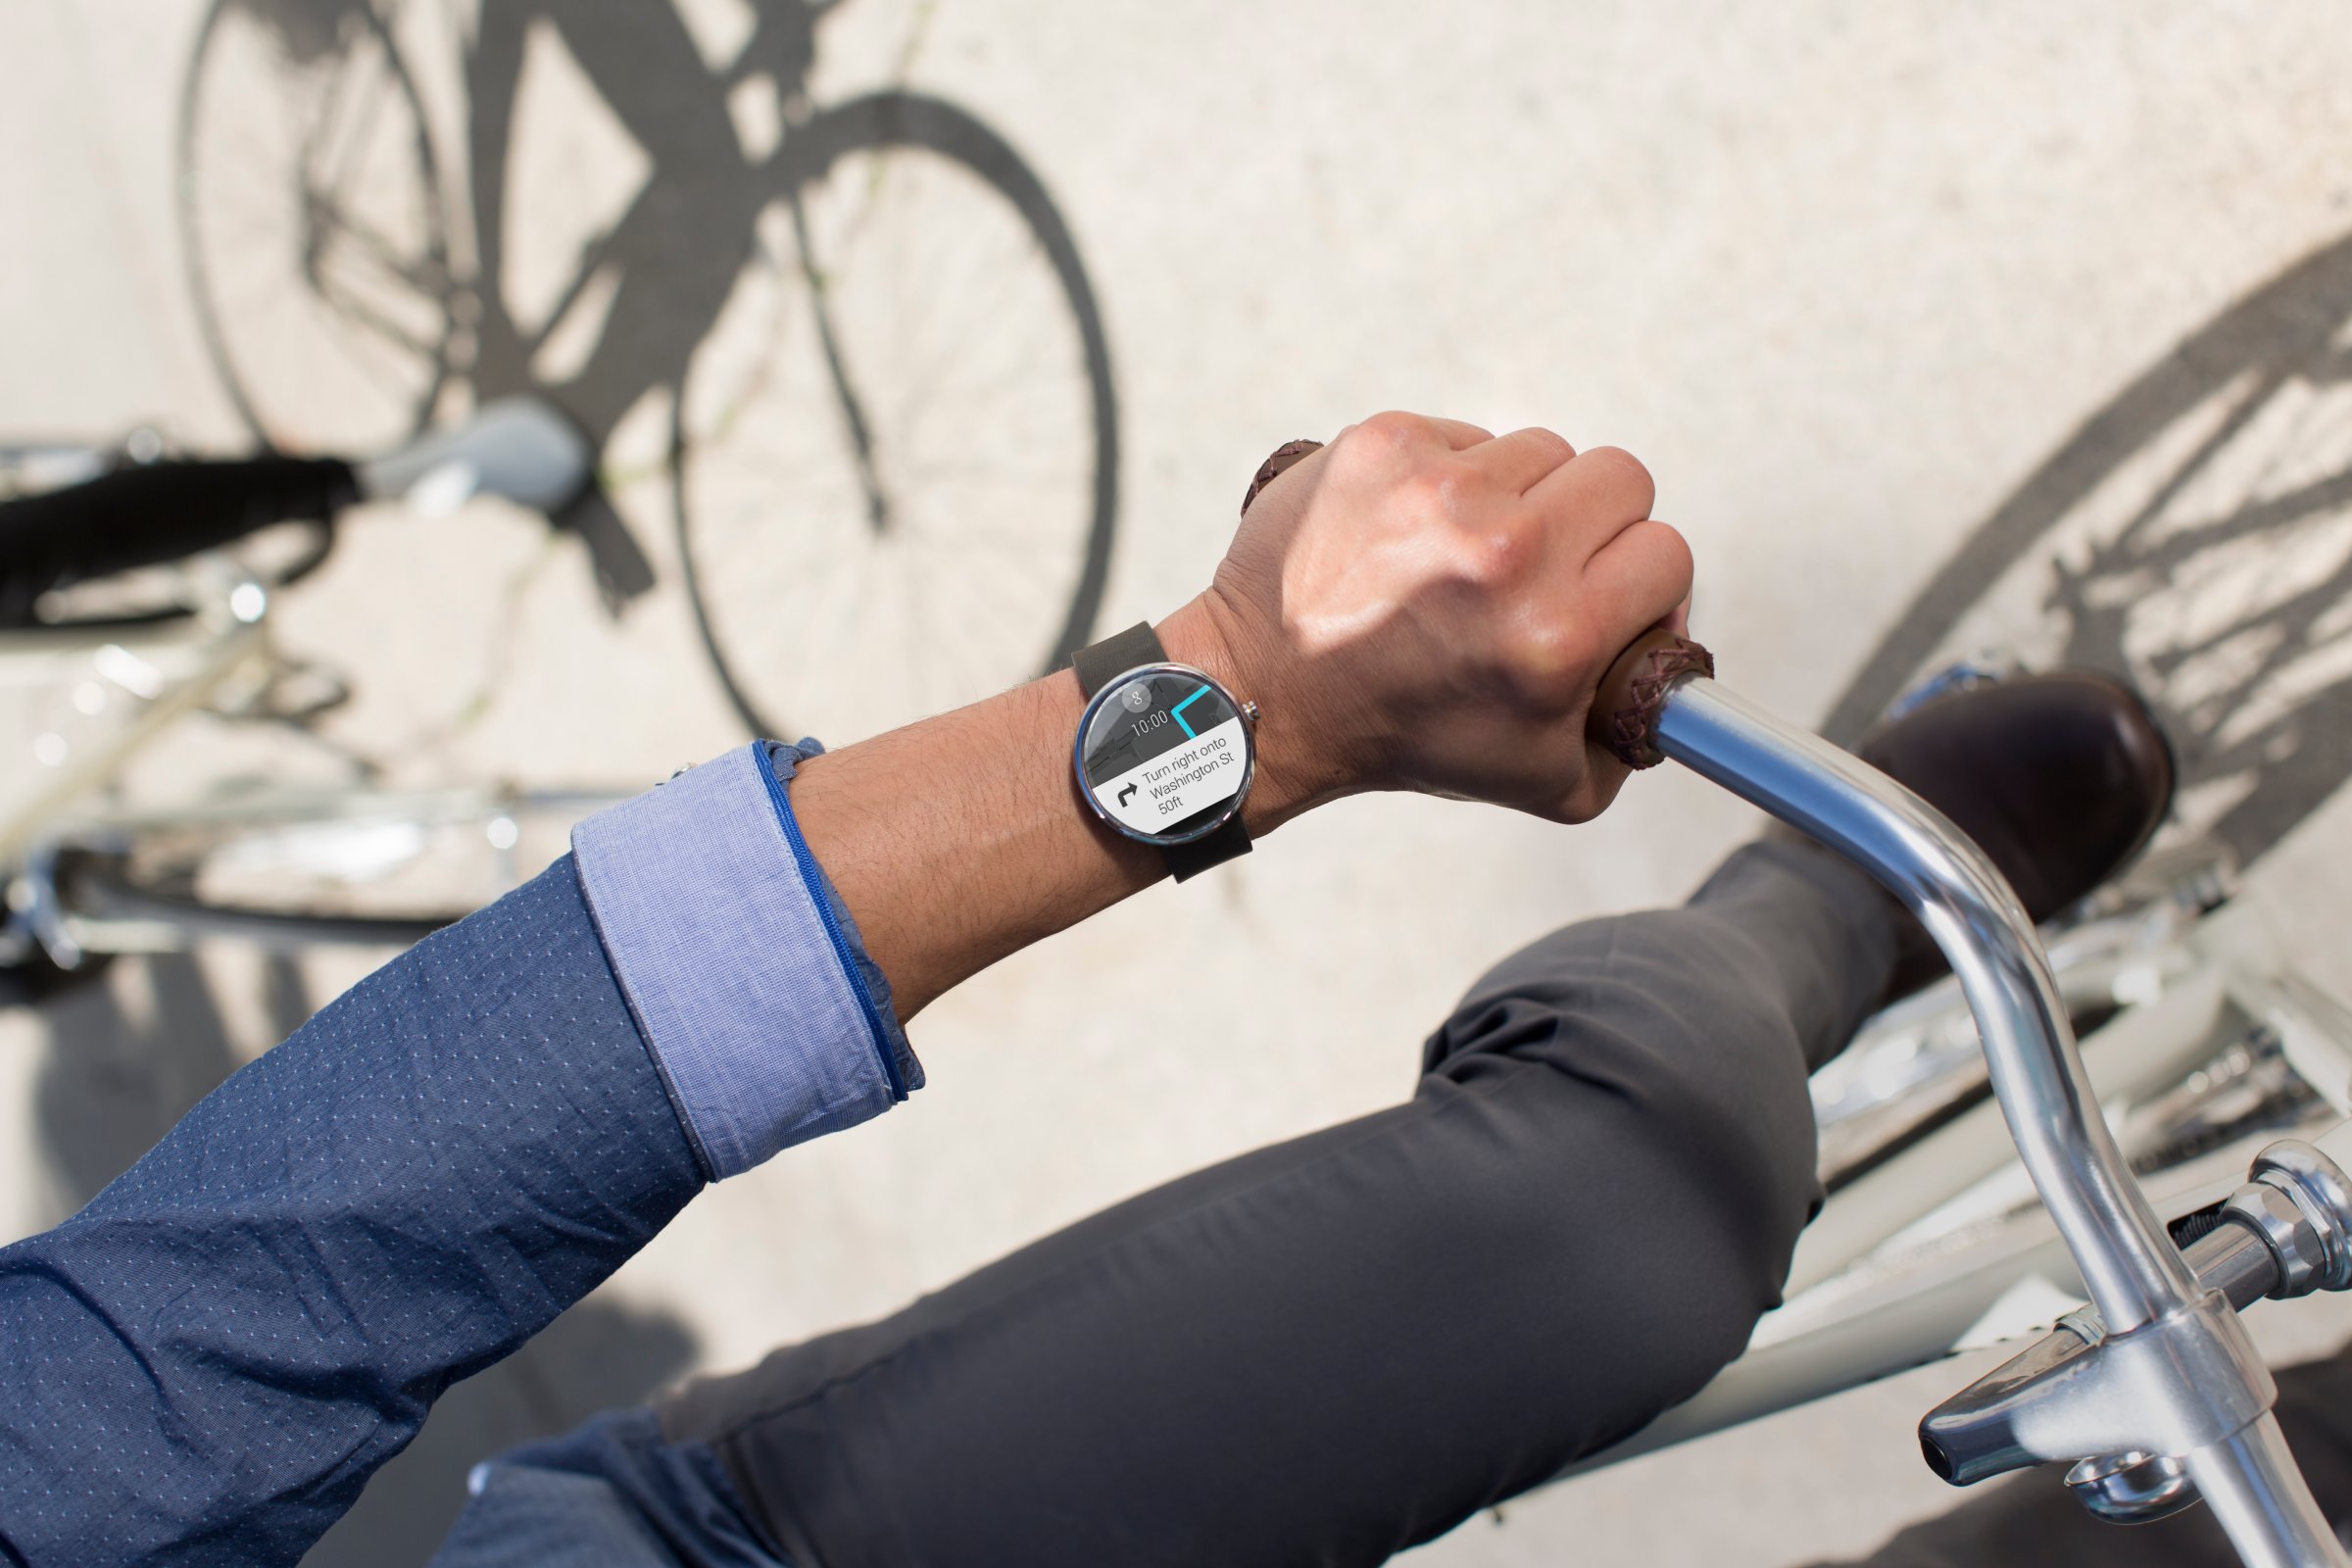 Moto 360, Powered by Android Wear